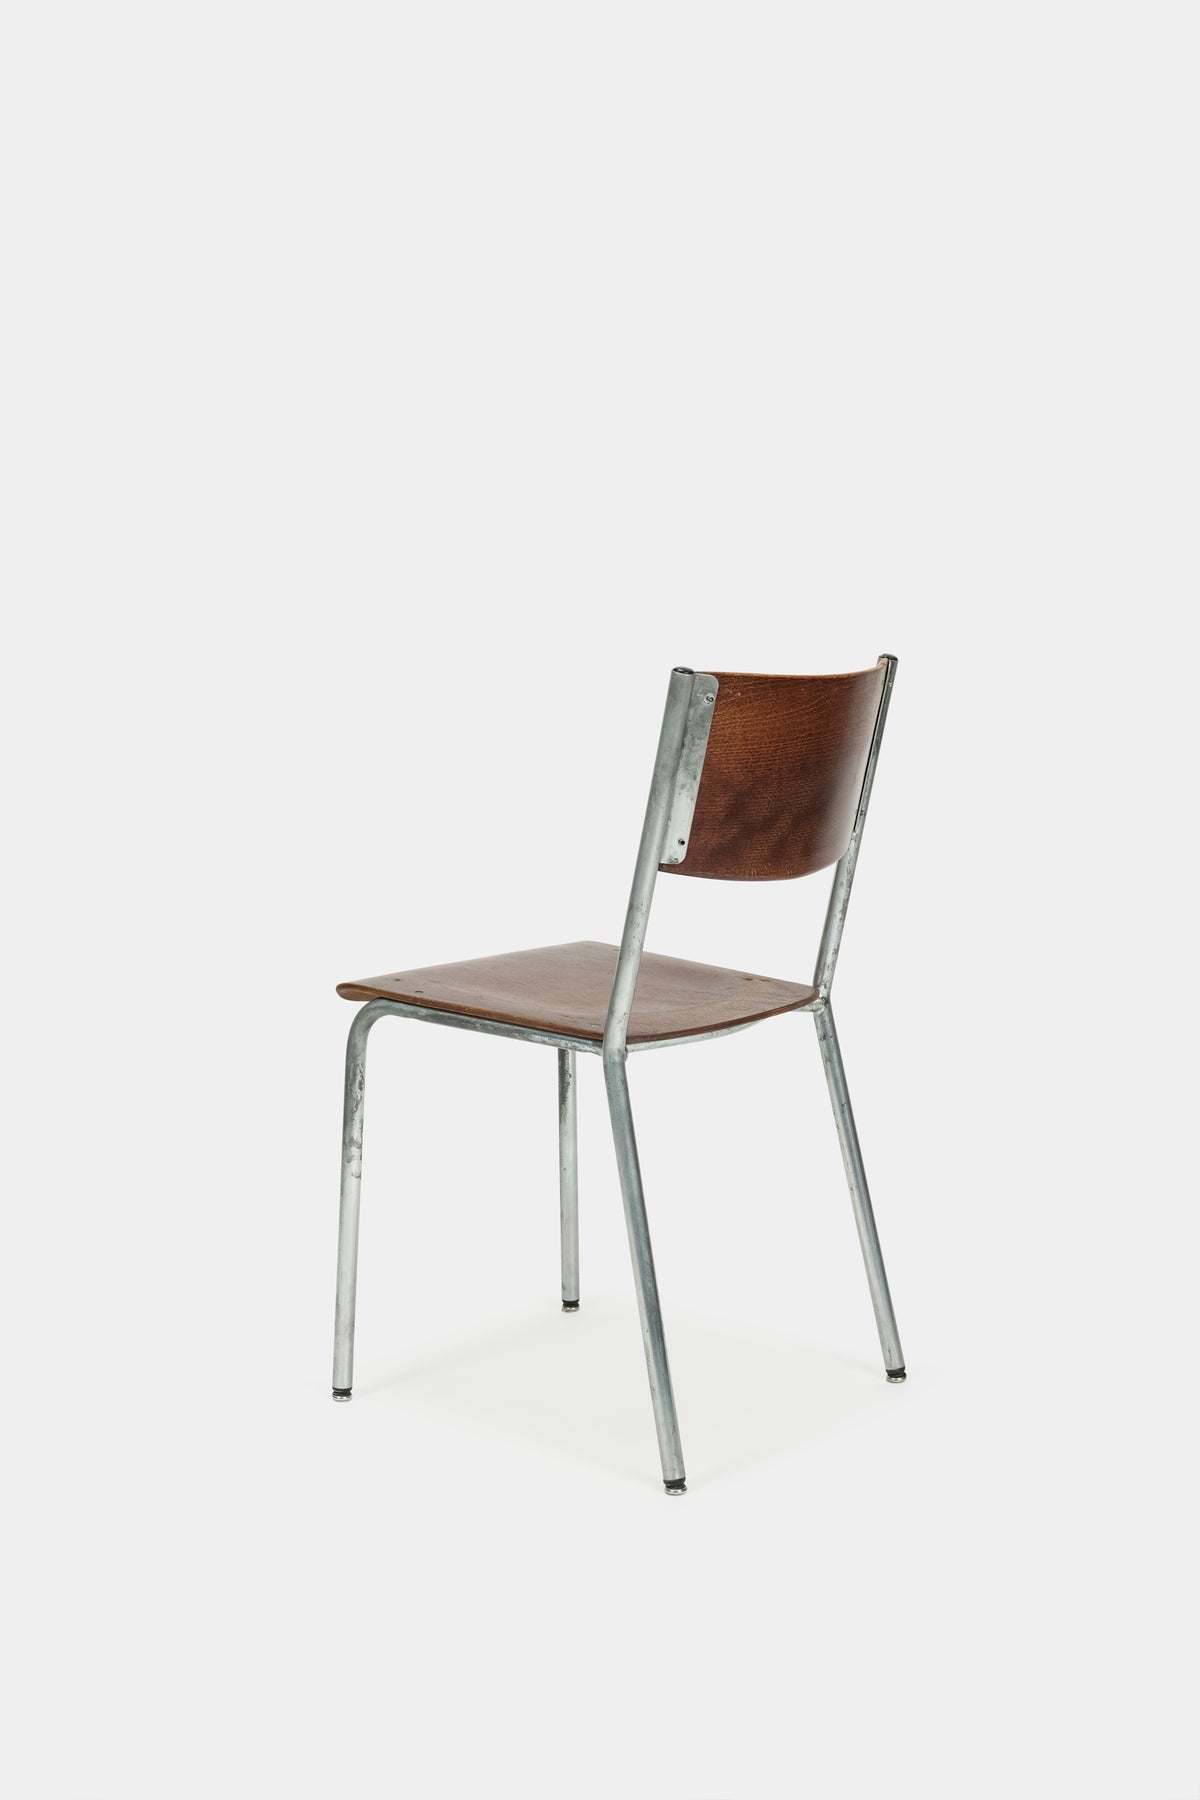 Embru Classic chair laminated wood 60s